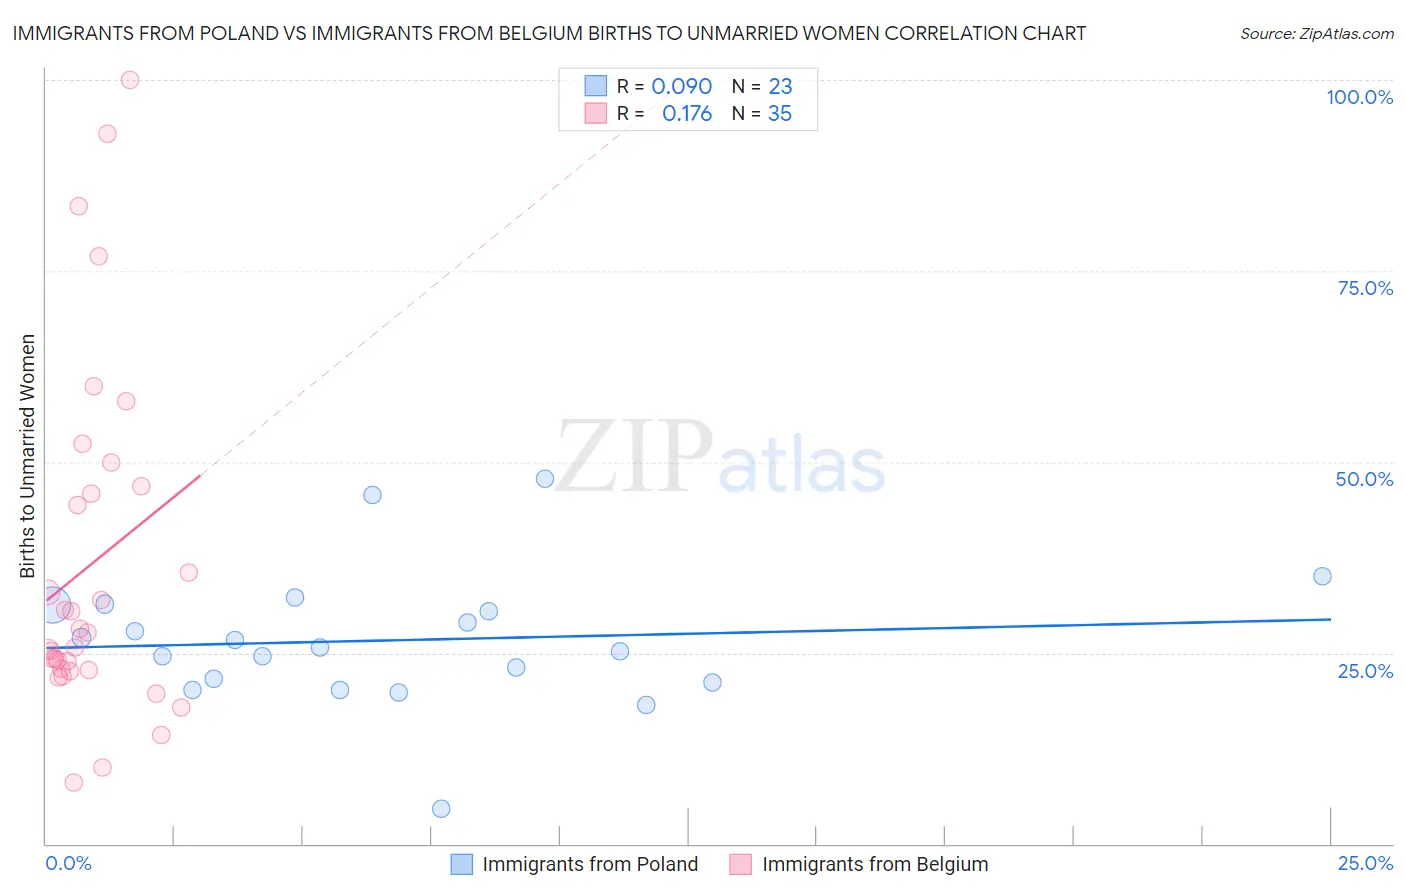 Immigrants from Poland vs Immigrants from Belgium Births to Unmarried Women